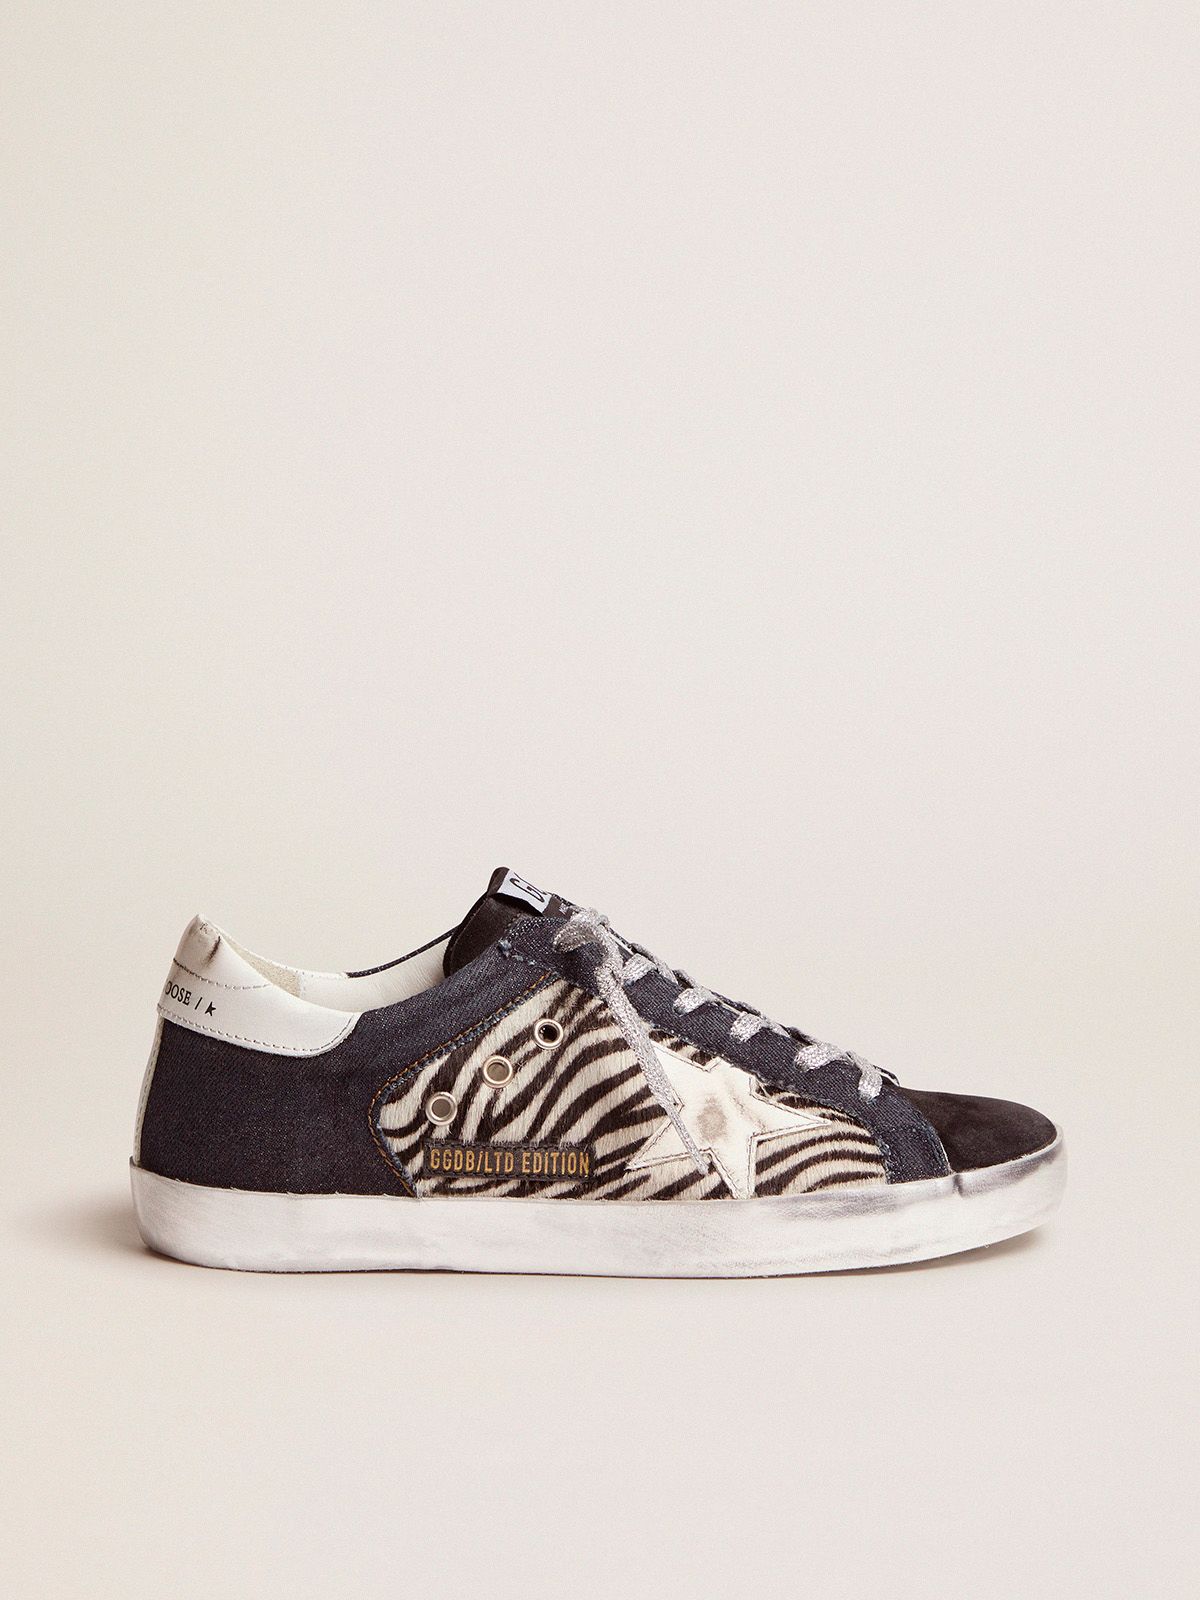 golden goose pony suede Super-Star skin LAB and sneakers denim, in Edition zebra-print Limited